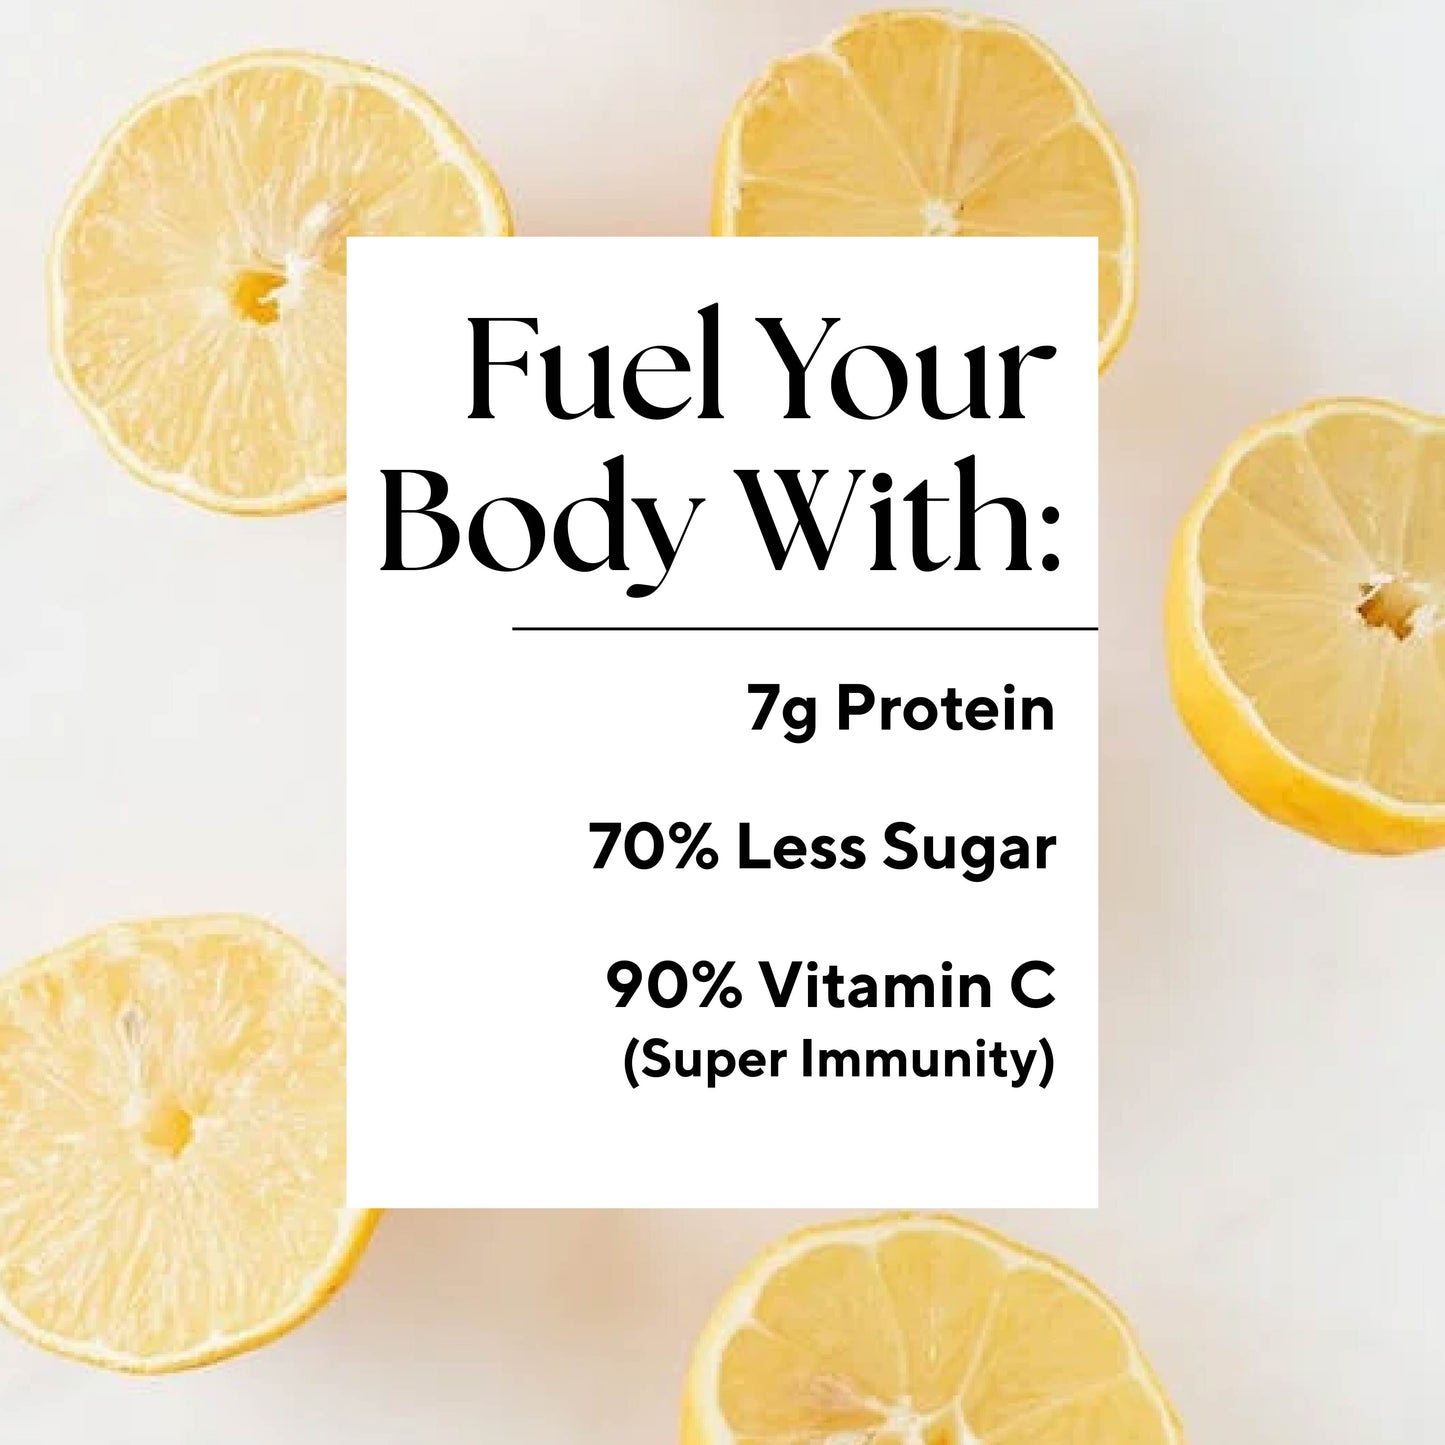 Infographic that reads: "Fuel your body with: 7g Protein, 70% Less Sugar, and 90% Vitamin C (Super Immunity)."